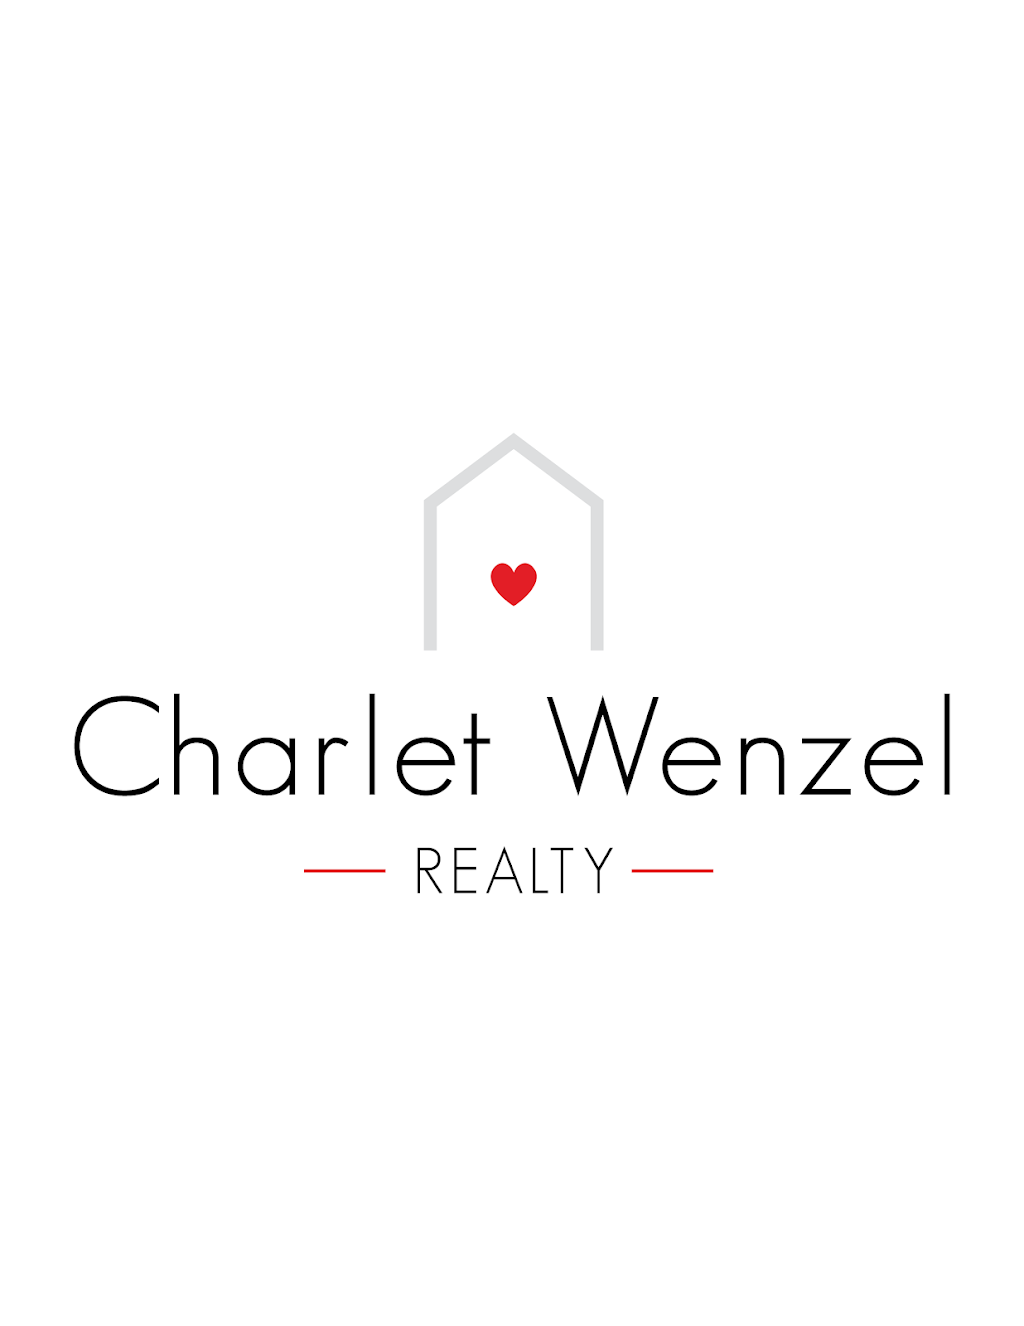 Charlet Wenzel Realty | 243 Wall St, Kingston, NY 12401 | Phone: (845) 514-2443